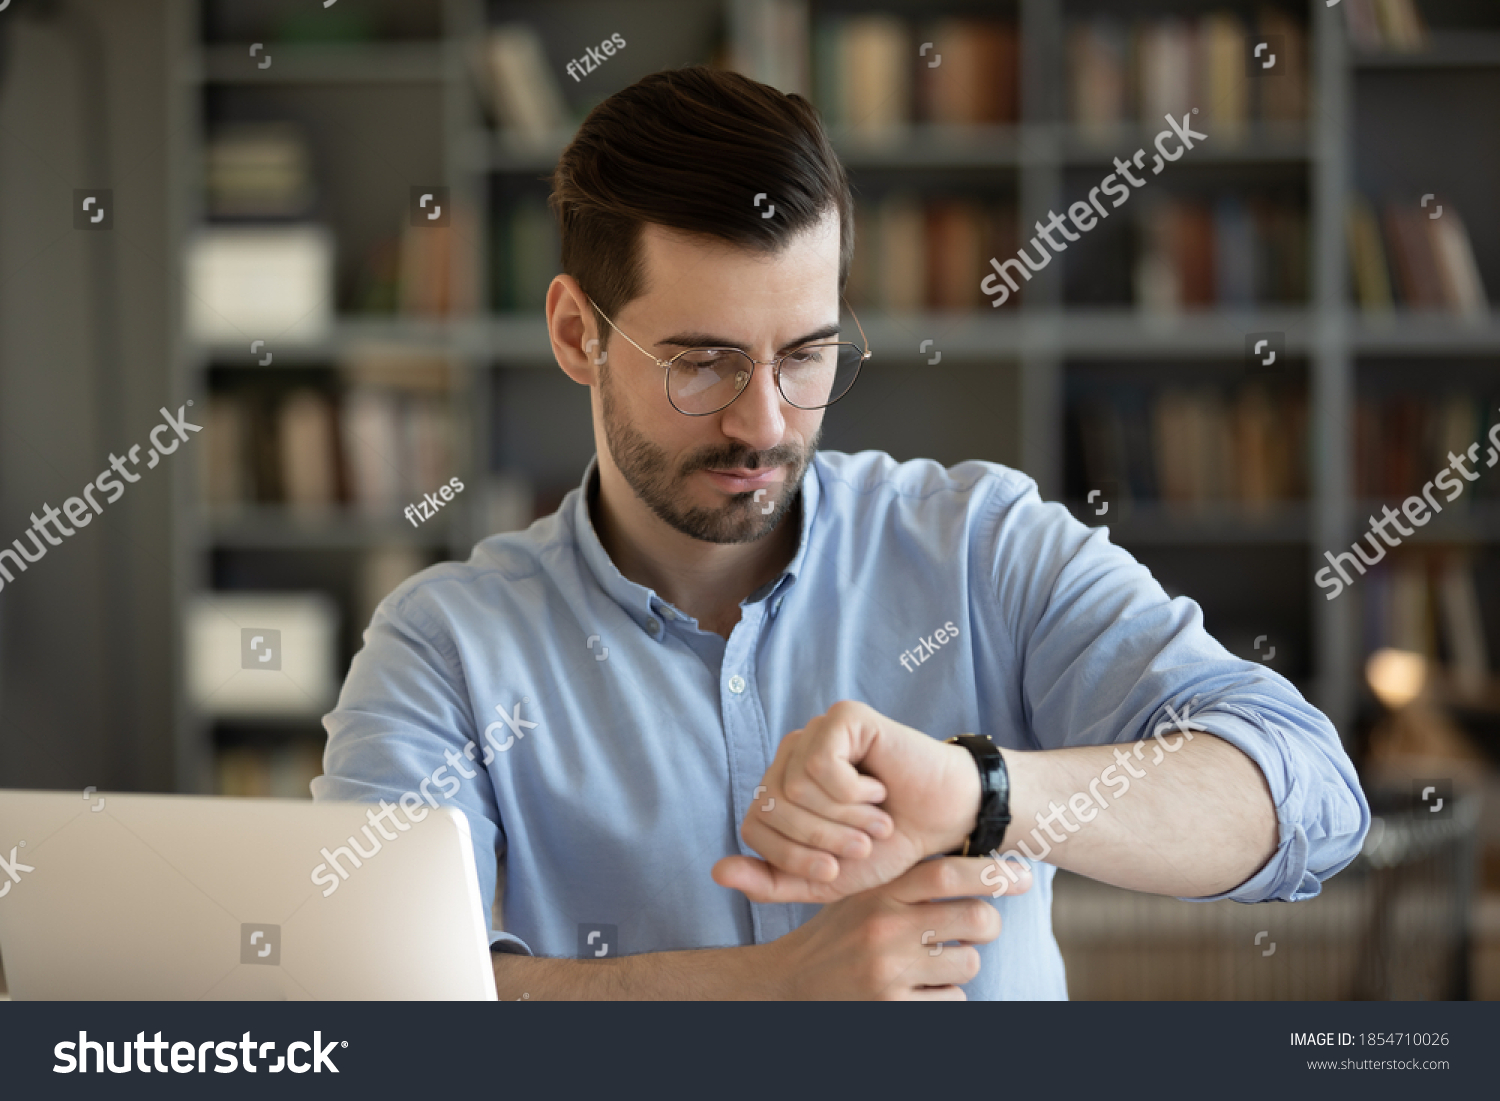 35s businessman wear glasses looks at wristwatch checks time waits for client who is late while sitting at work place desk with laptop. Concept of business, time is money, punctuality and timekeeping #1854710026